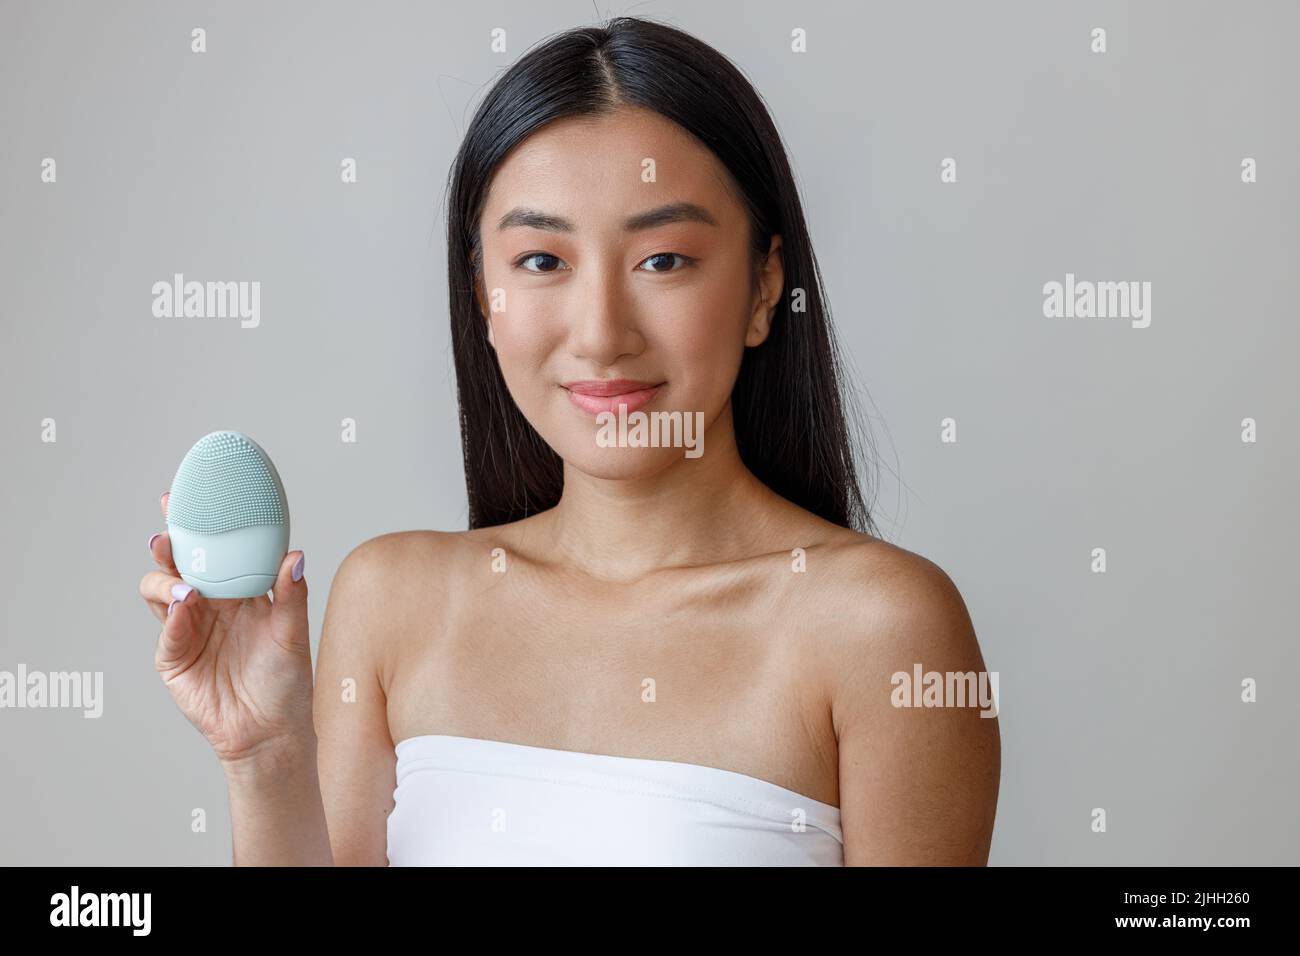 Asian young woman holding cleansing face massager Stock Photo